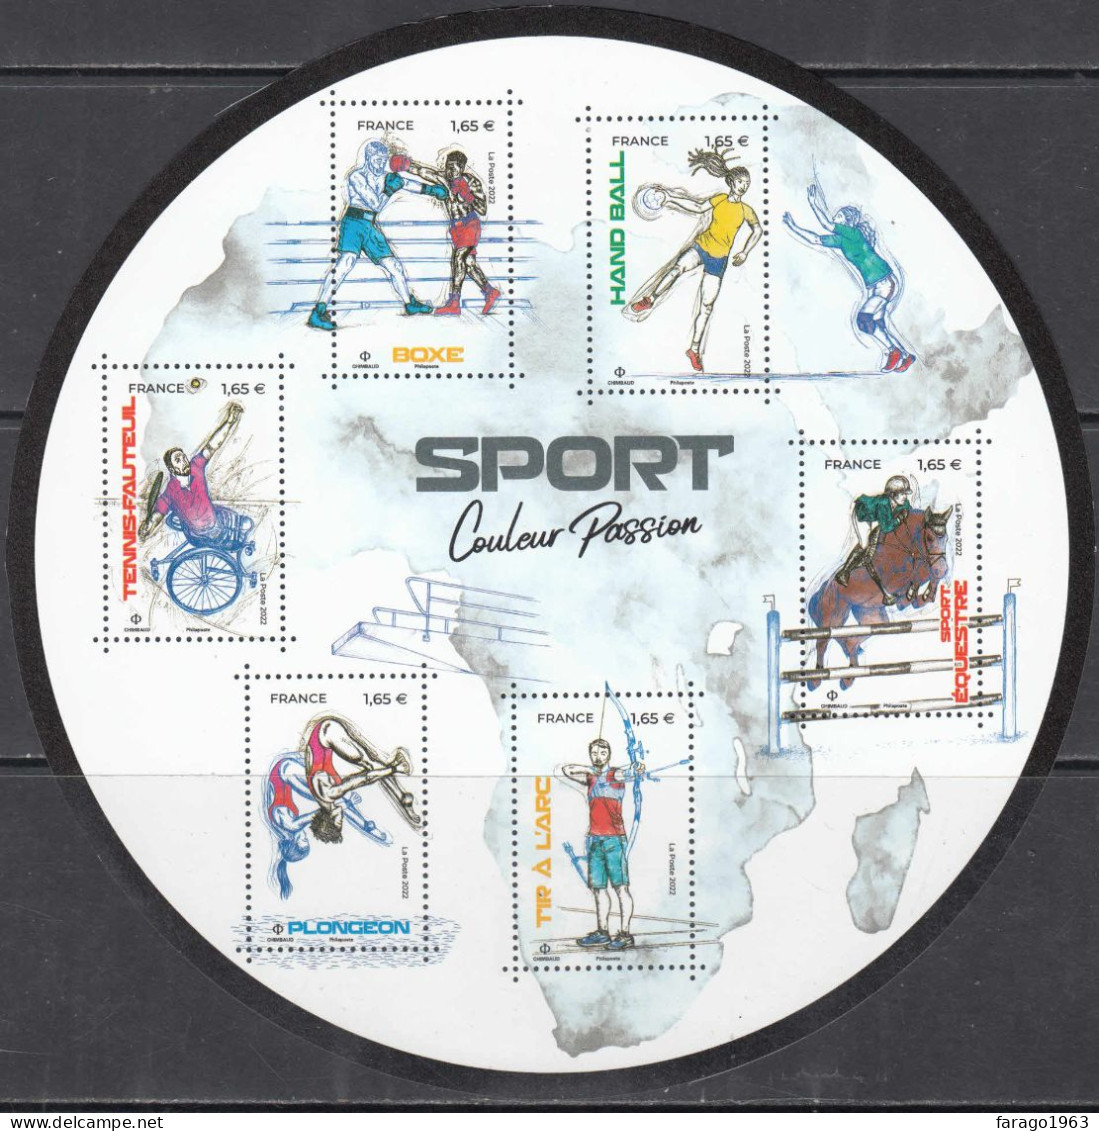 2022 France Sport Equestrian Horses Archery Boxing Miniature Sheet Of 6 MNH @ BELOW FACE VALUE - Unused Stamps